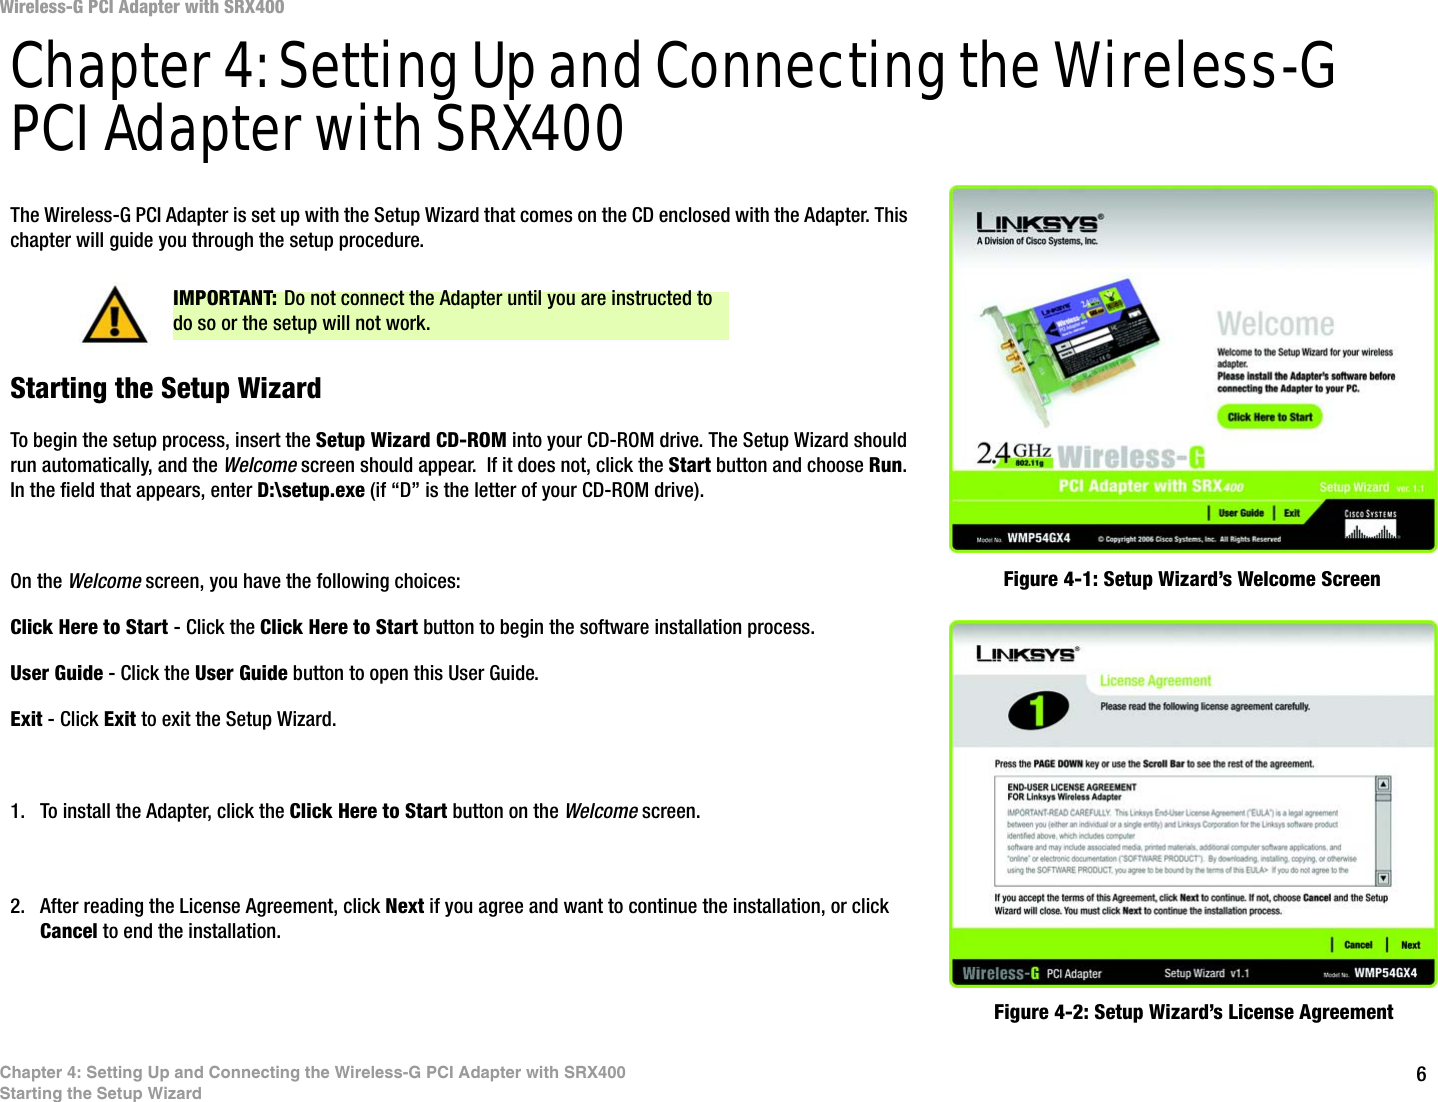 6Chapter 4: Setting Up and Connecting the Wireless-G PCI Adapter with SRX400Starting the Setup WizardWireless-G PCI Adapter with SRX400Chapter 4: Setting Up and Connecting the Wireless-G PCI Adapter with SRX400The Wireless-G PCI Adapter is set up with the Setup Wizard that comes on the CD enclosed with the Adapter. This chapter will guide you through the setup procedure. Starting the Setup WizardTo begin the setup process, insert the Setup Wizard CD-ROM into your CD-ROM drive. The Setup Wizard should run automatically, and the Welcome screen should appear.  If it does not, click the Start button and choose Run. In the field that appears, enter D:\setup.exe (if “D” is the letter of your CD-ROM drive). On the Welcome screen, you have the following choices:Click Here to Start - Click the Click Here to Start button to begin the software installation process. User Guide - Click the User Guide button to open this User Guide. Exit - Click Exit to exit the Setup Wizard.1. To install the Adapter, click the Click Here to Start button on the Welcome screen.2. After reading the License Agreement, click Next if you agree and want to continue the installation, or click Cancel to end the installation.Figure 4-1: Setup Wizard’s Welcome ScreenFigure 4-2: Setup Wizard’s License AgreementIMPORTANT: Do not connect the Adapter until you are instructed to do so or the setup will not work.